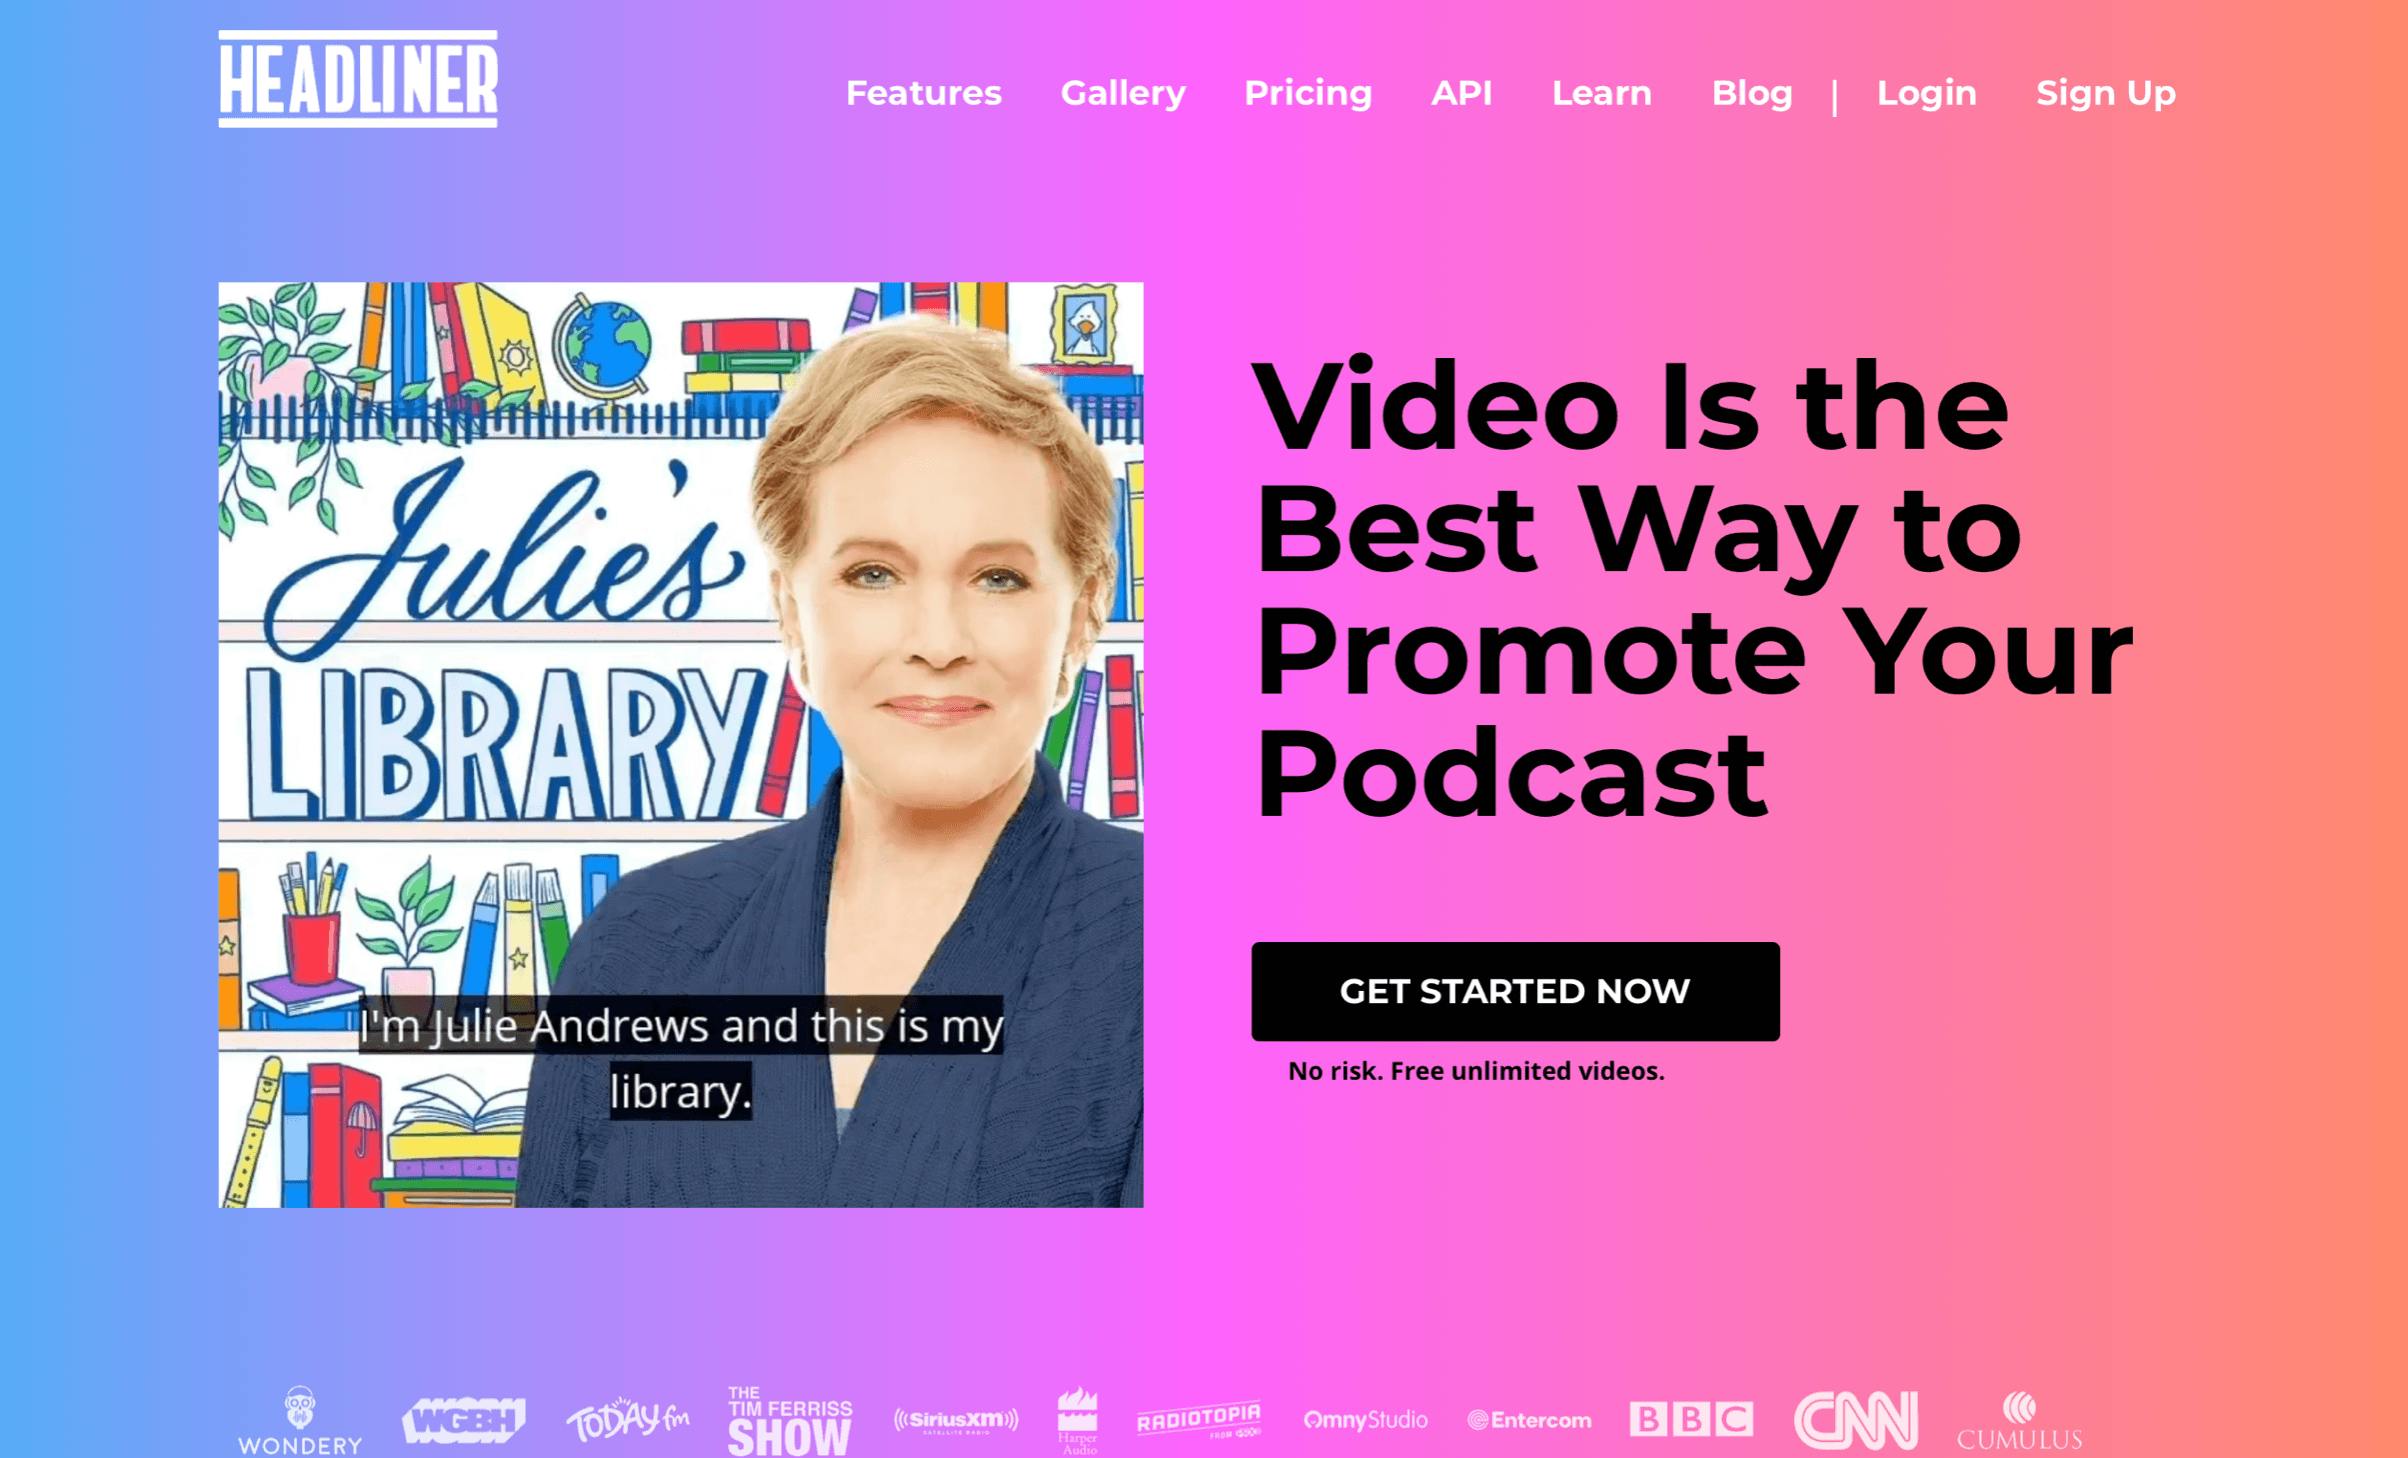 Headliner homepage showing Julia Andrew's podcast audiogram with colorful background and black text + button